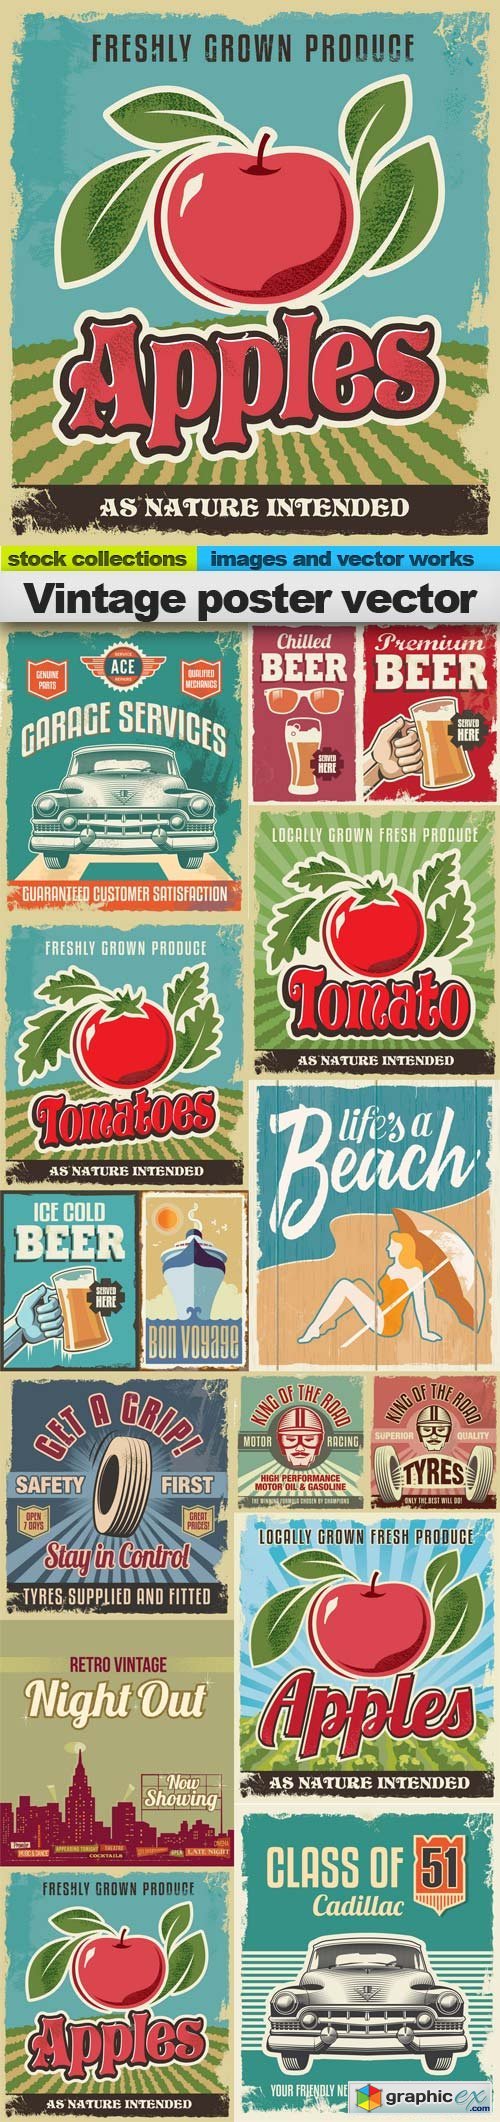 Vintage poster vector, 15 x EPS